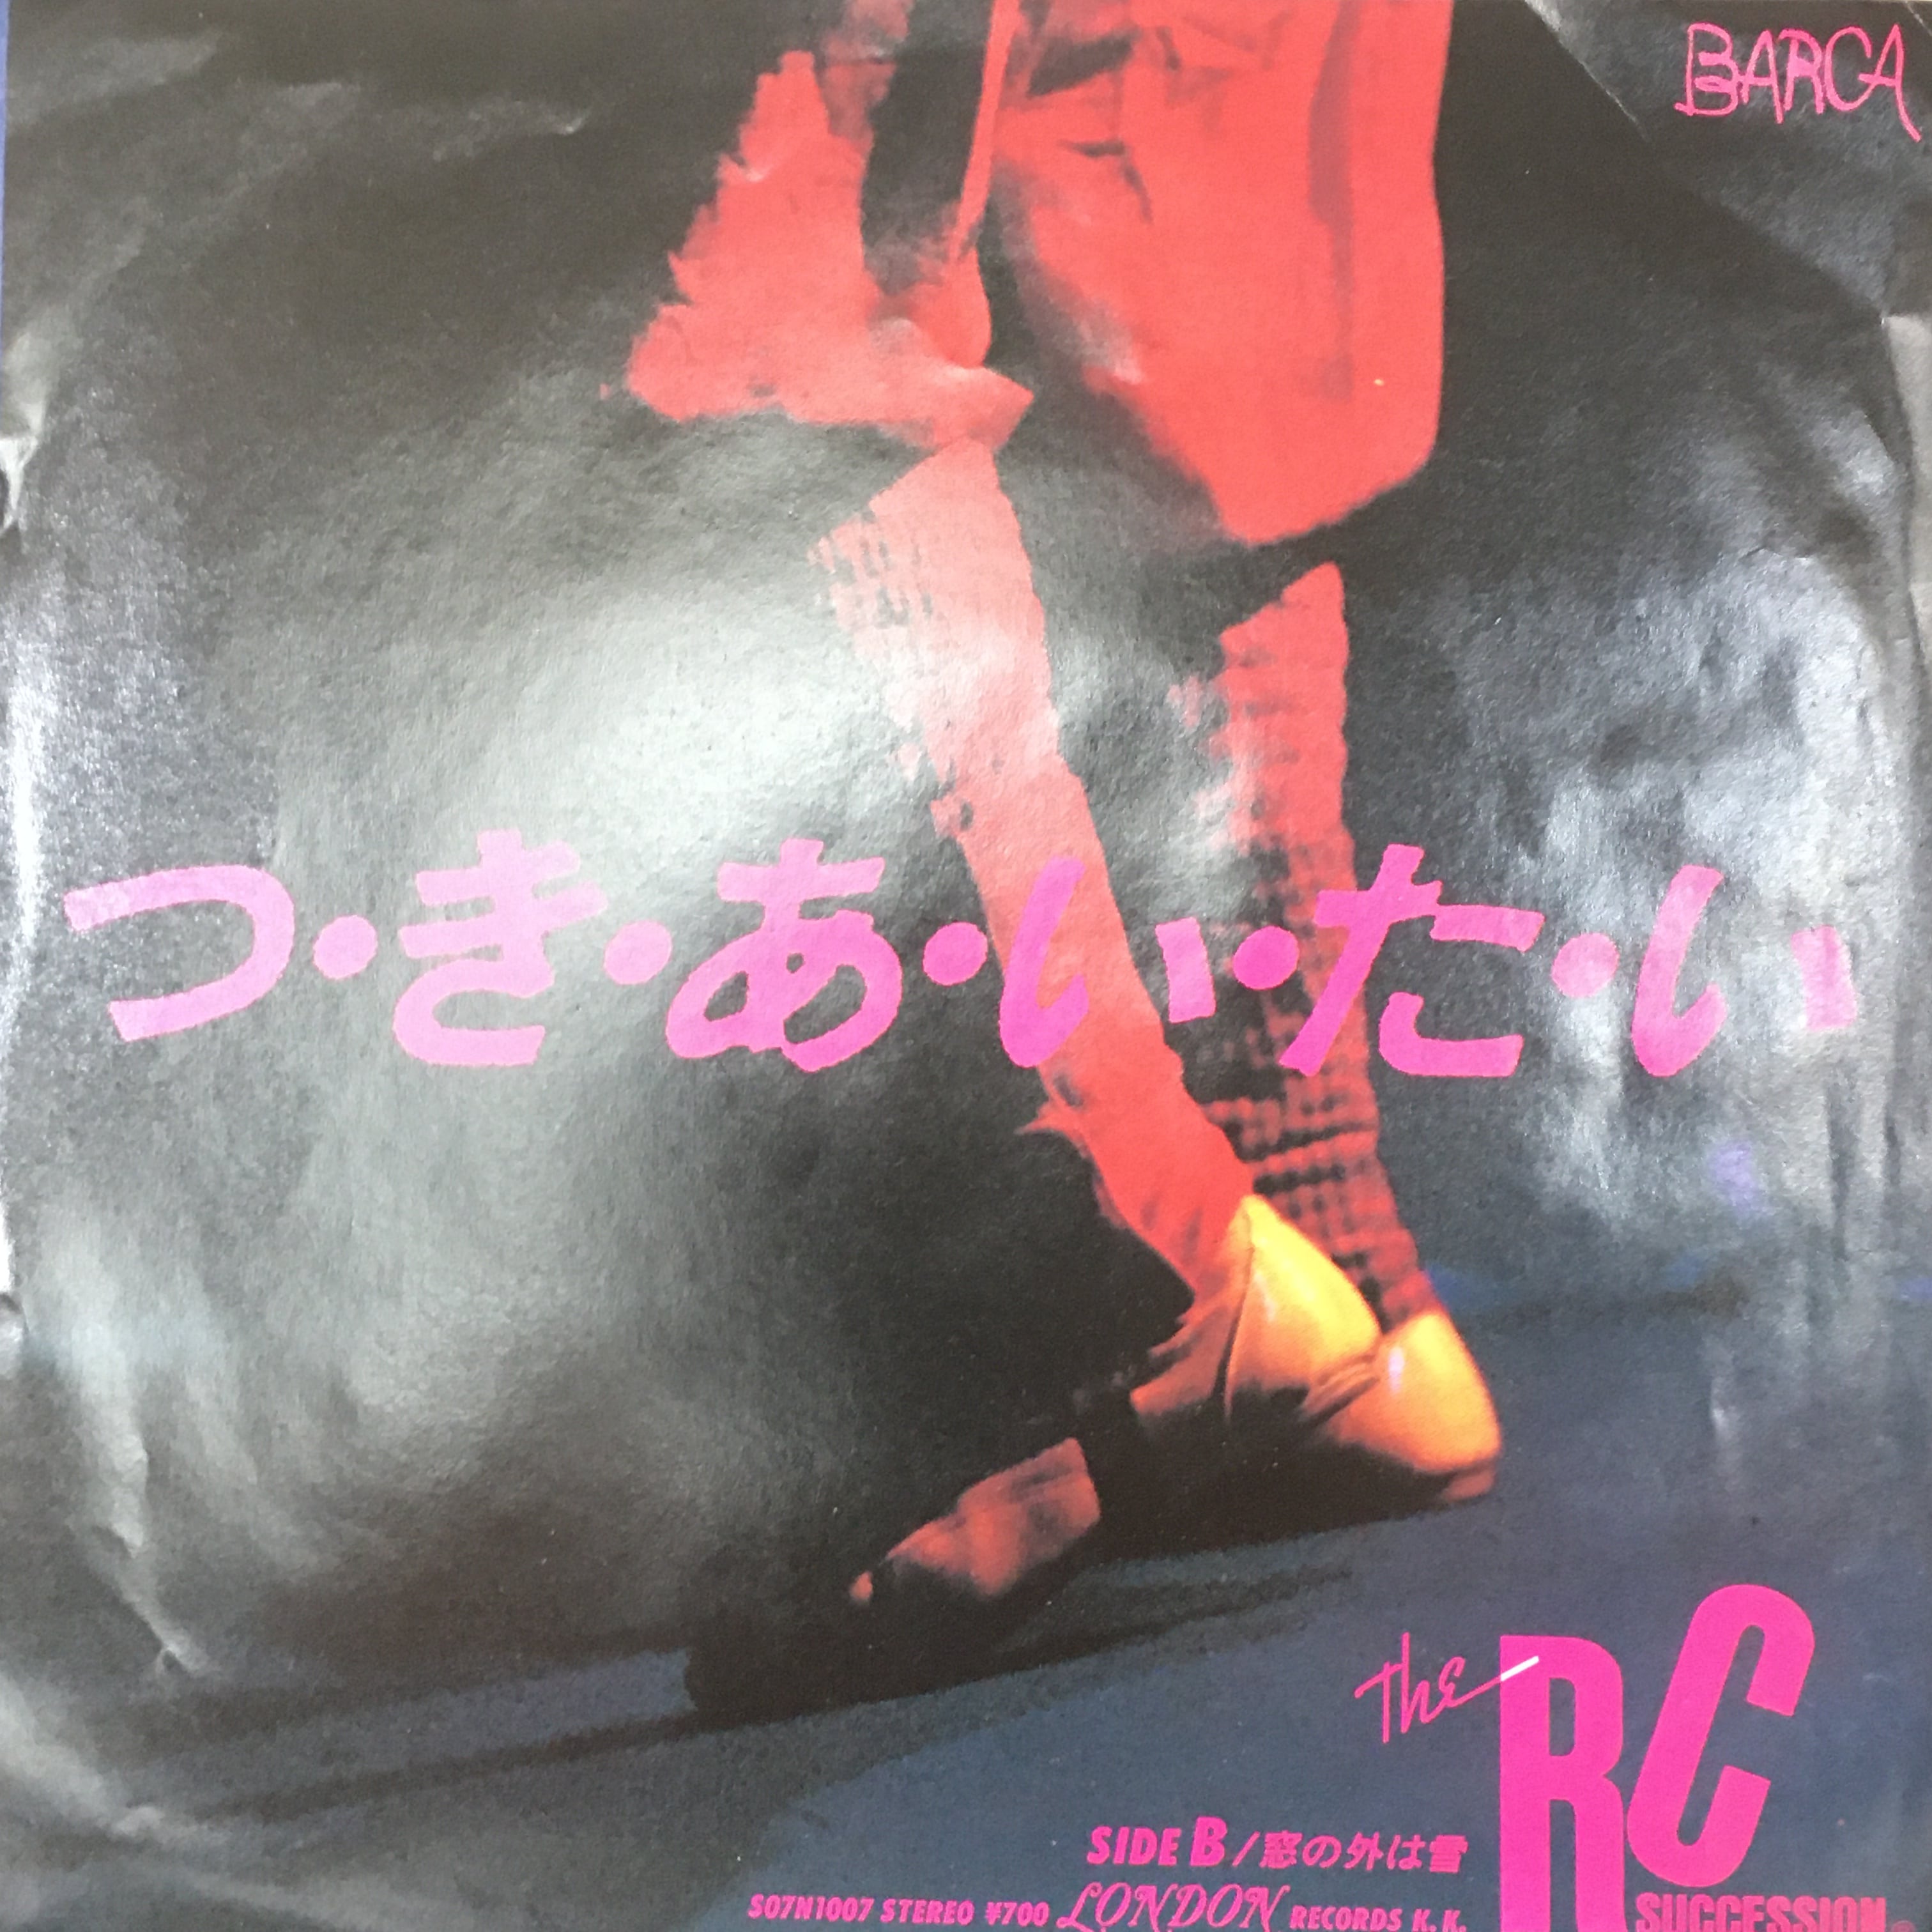 EP】RCサクセション/つ・き・あ・い・た・い Downtown Records 45 Branch